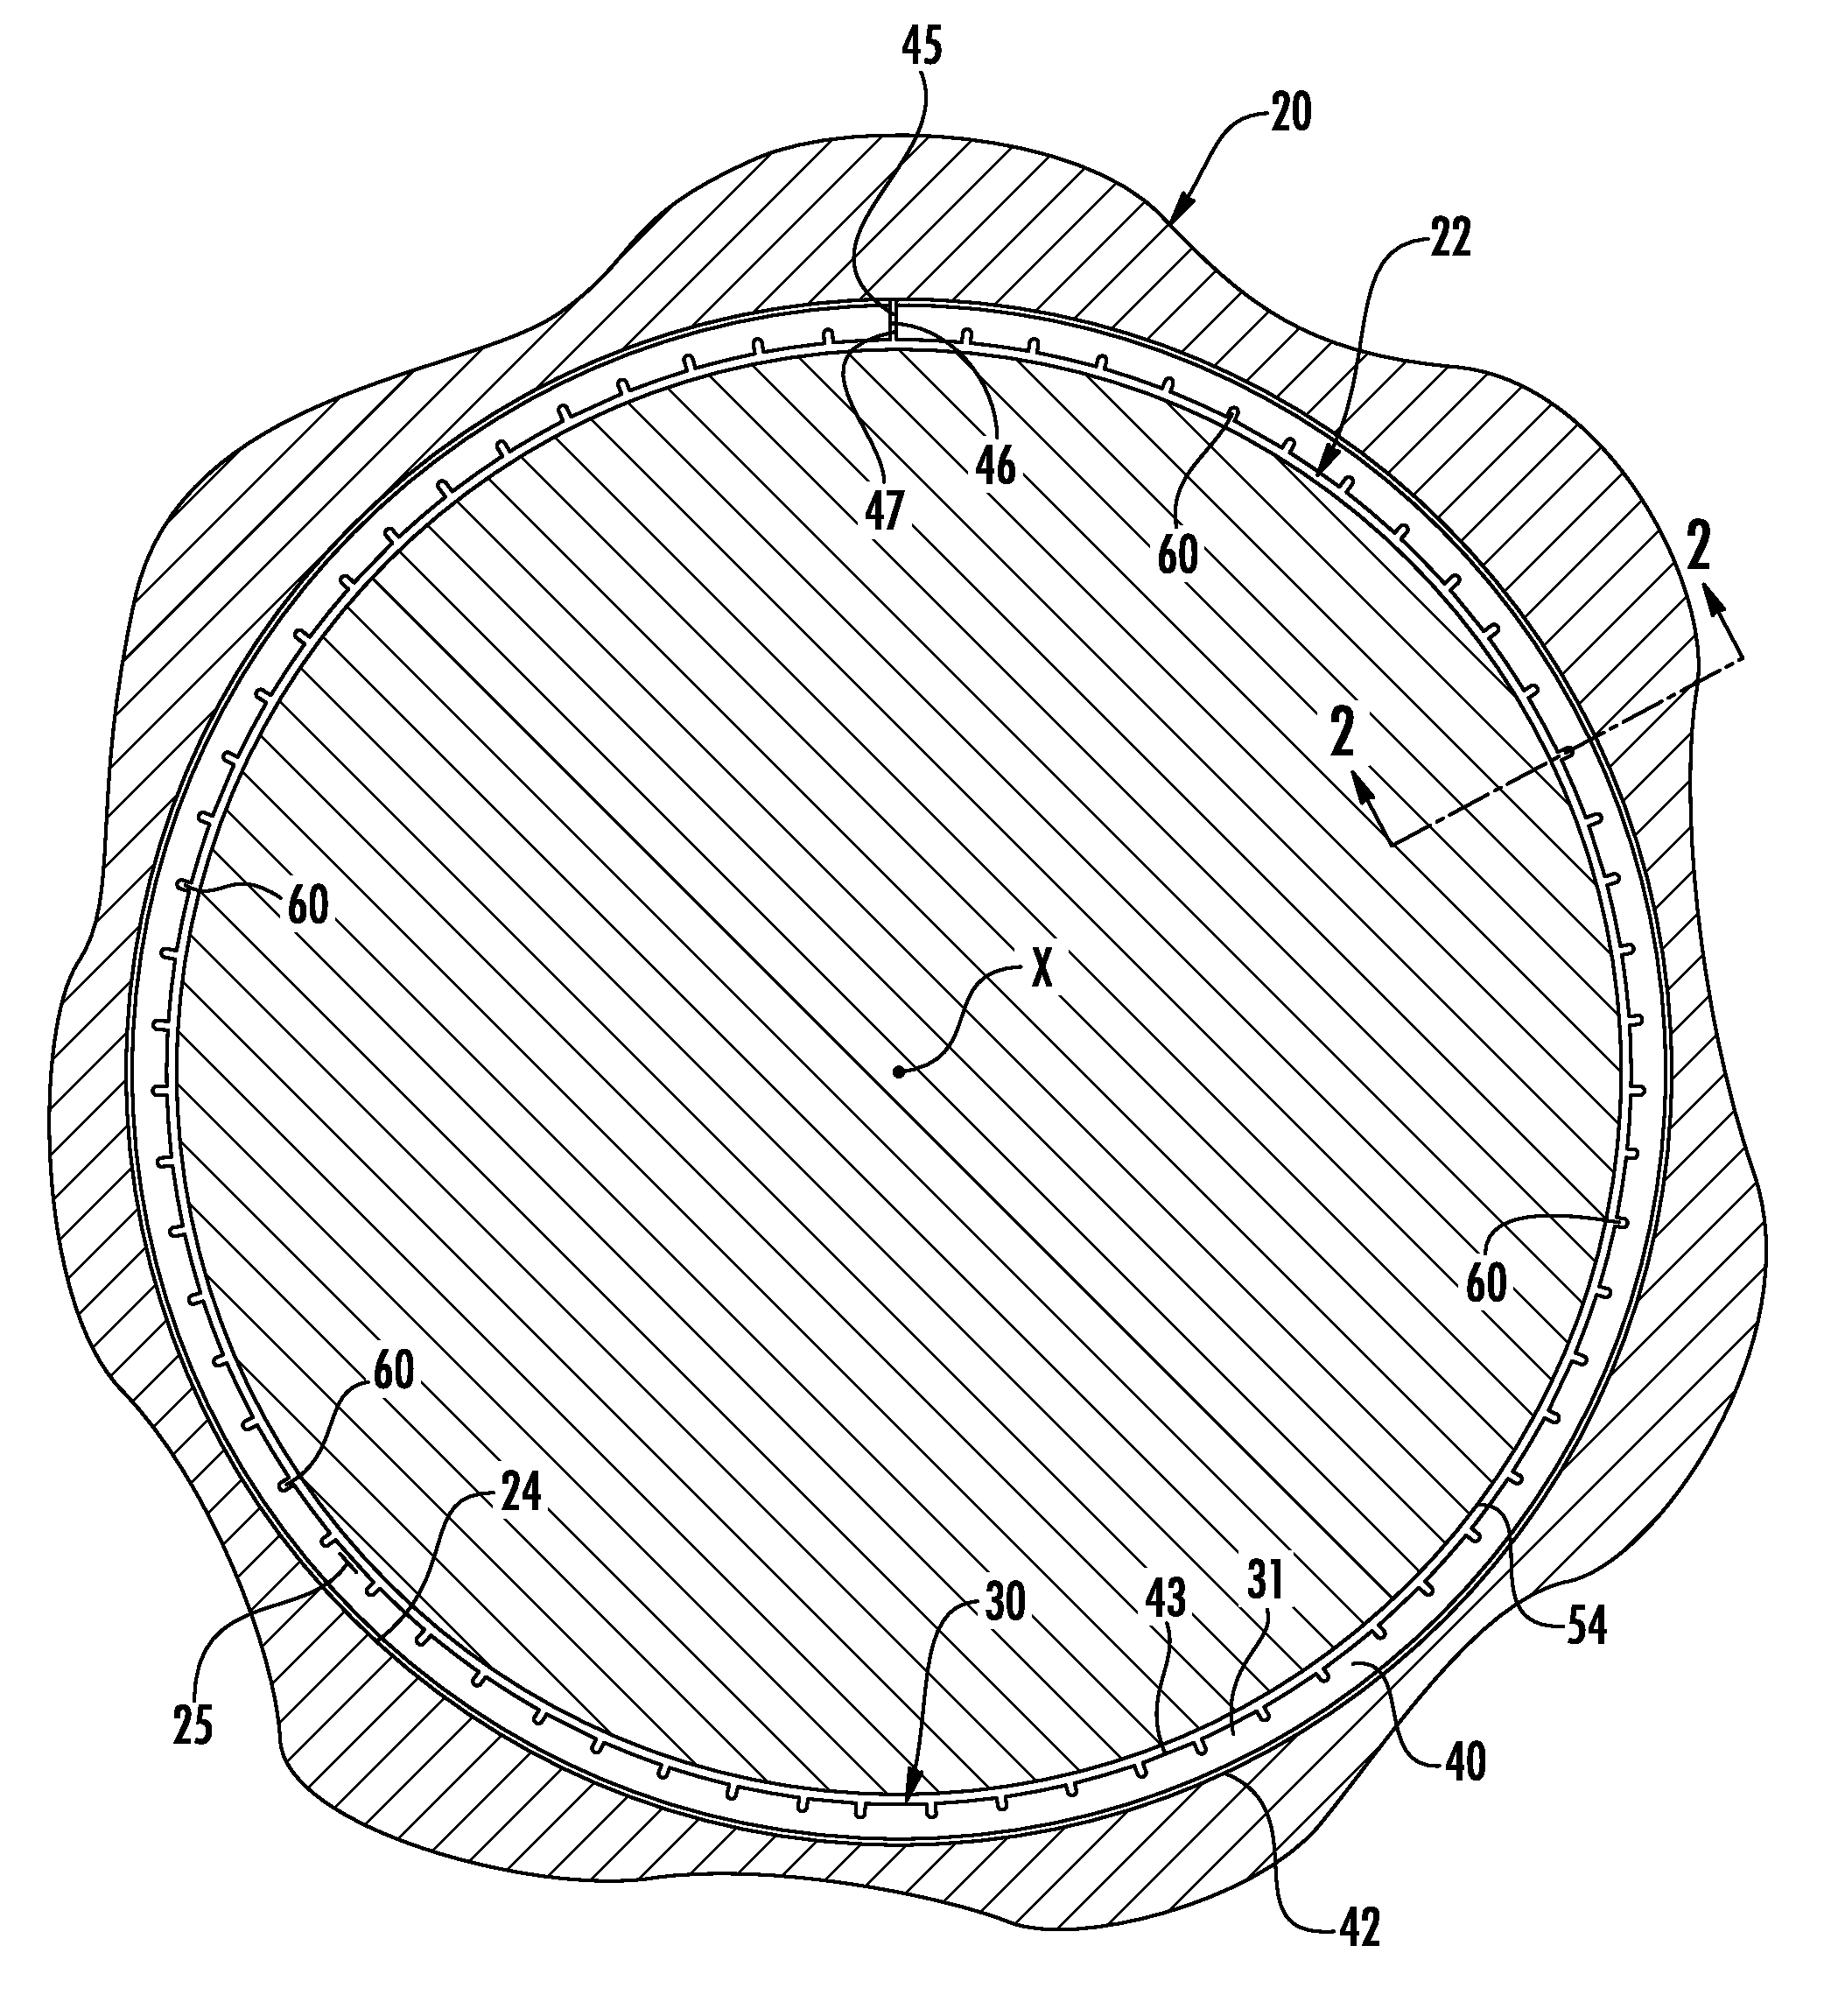 Radially notched piston rings